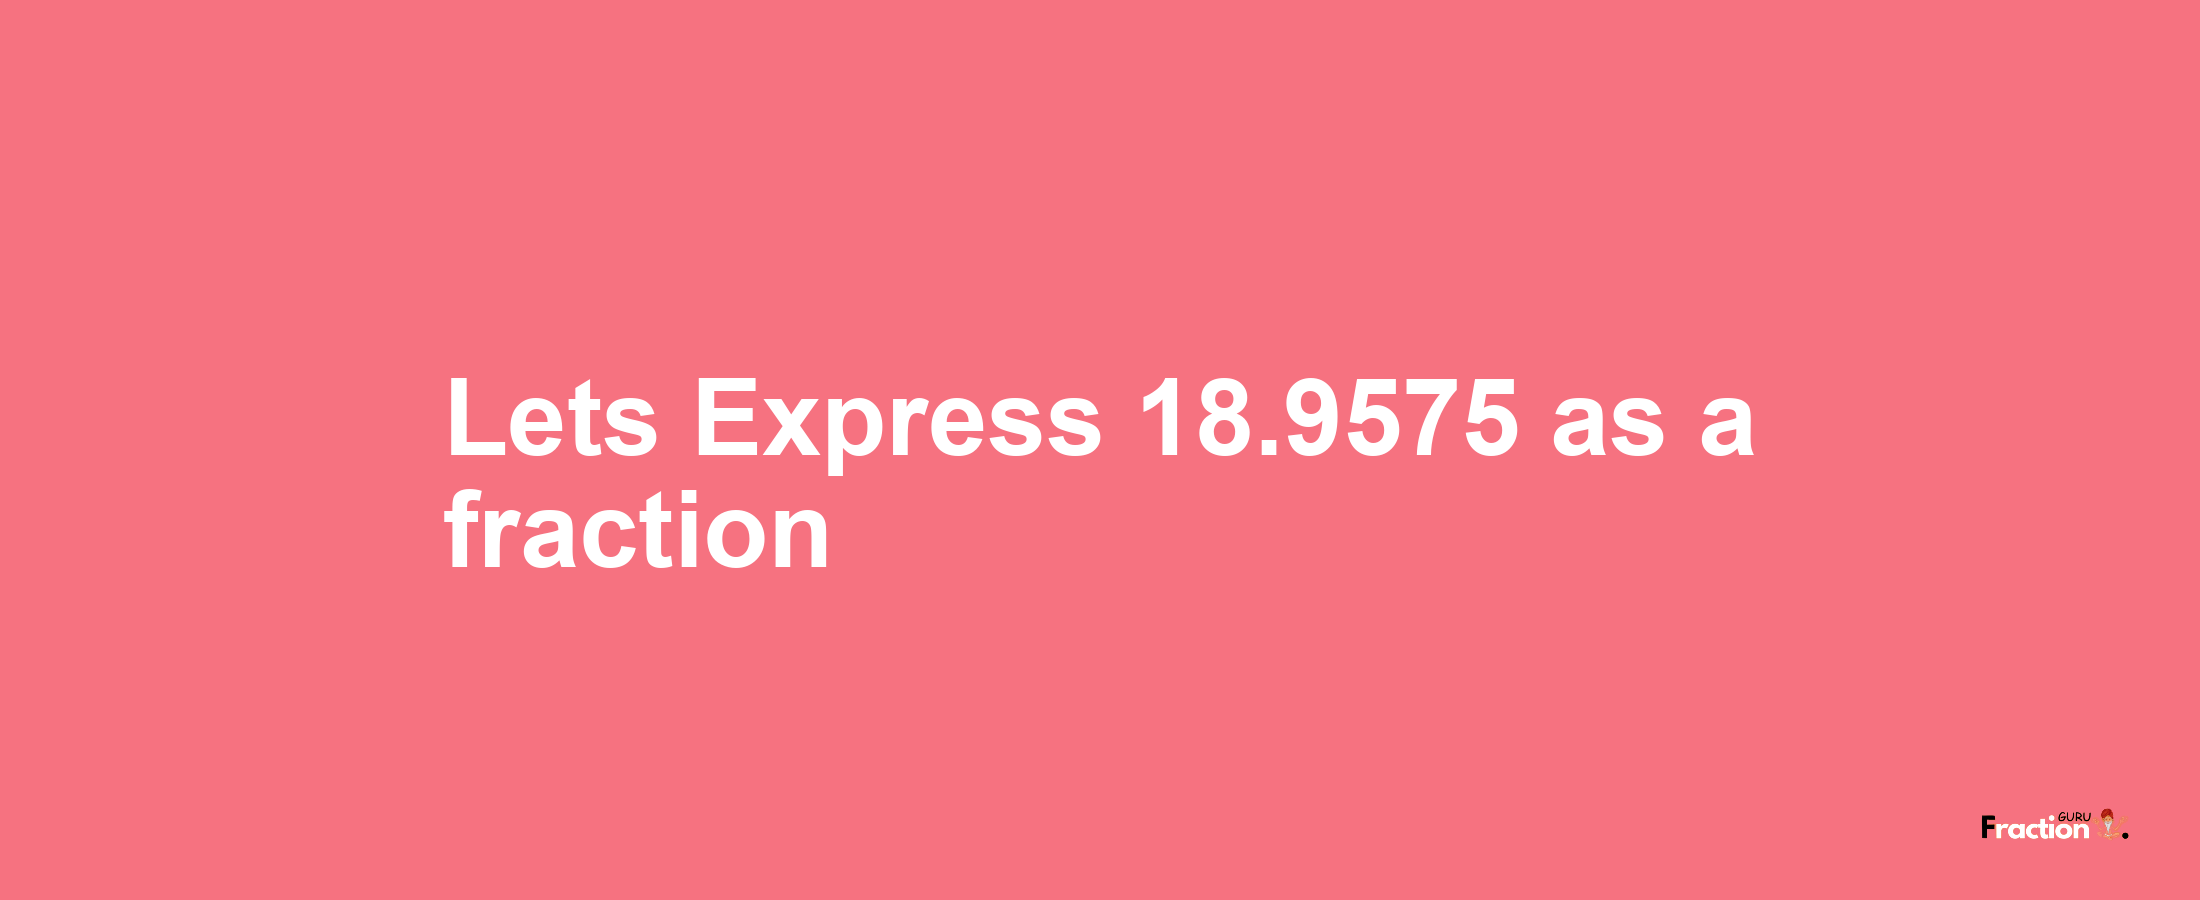 Lets Express 18.9575 as afraction